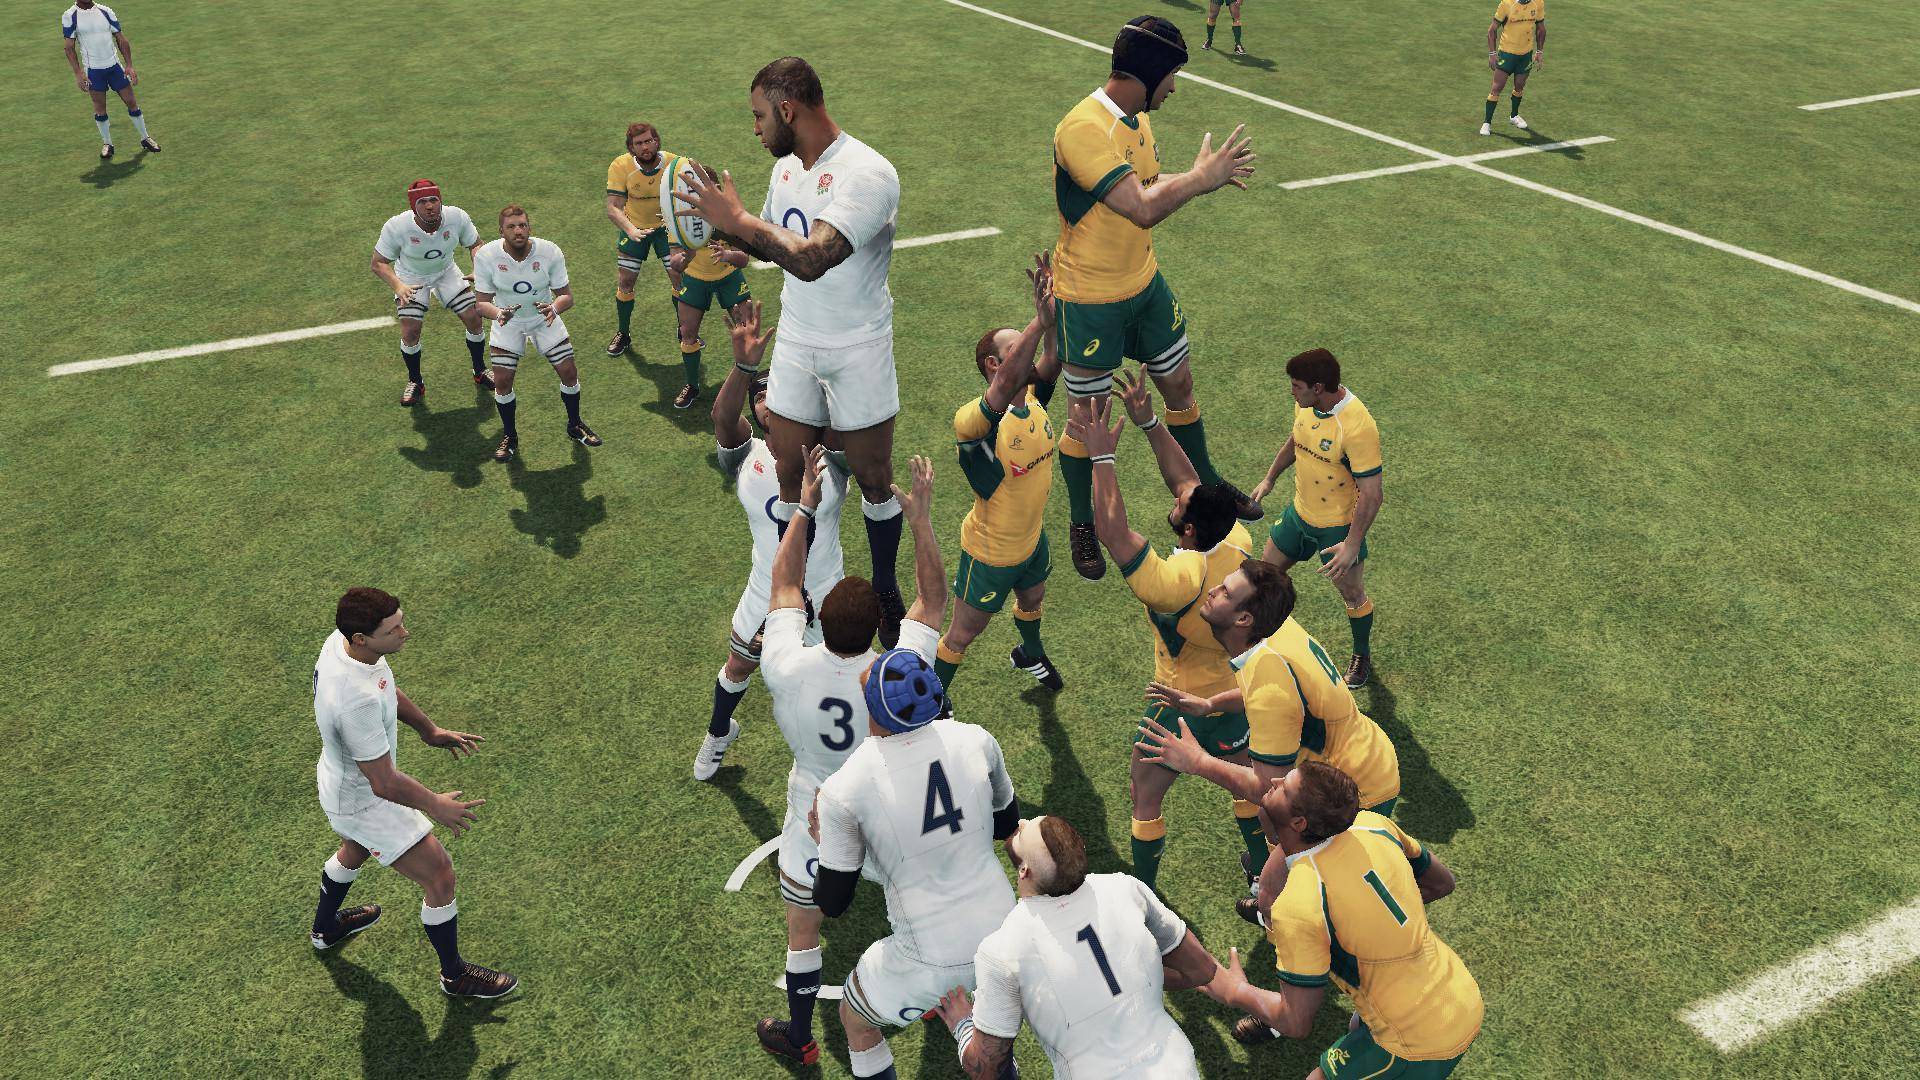 sidhe rugby challenge 3